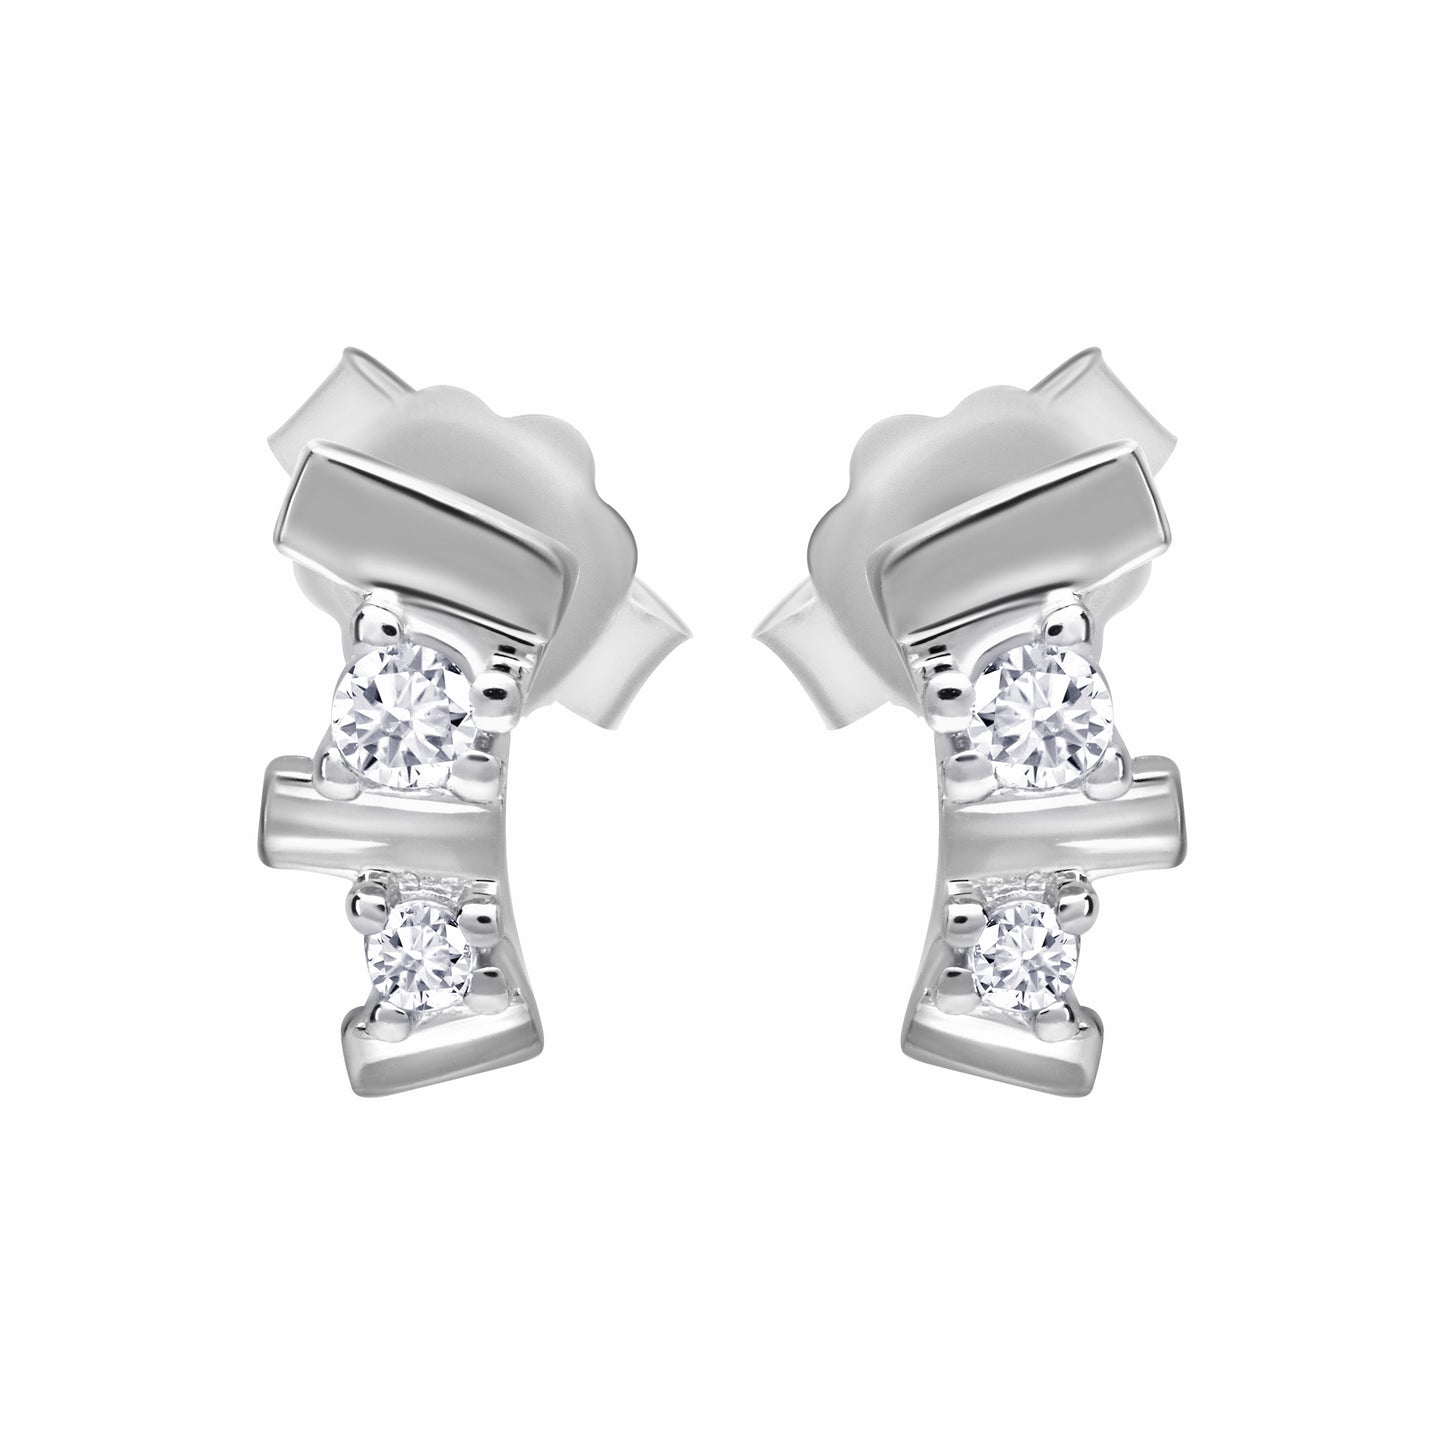 Trilogy silver Earrings on white background